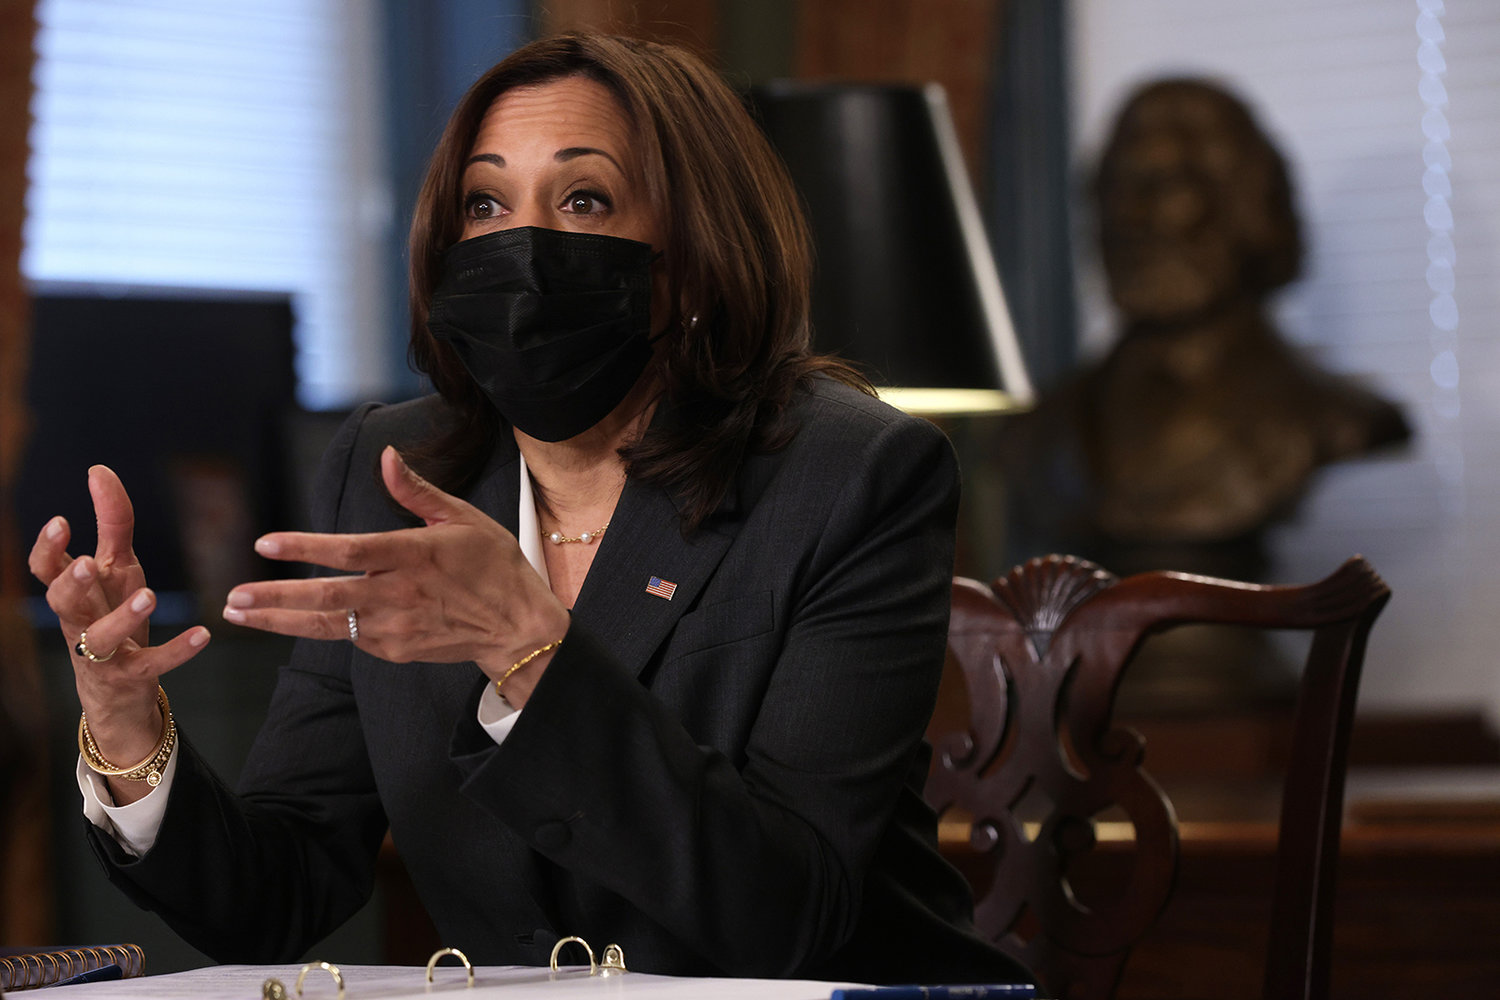 U.S. Vice President Kamala Harris speaks during a roundtable at the Ceremonial Office of the Vice President at Eisenhower Executive Office Building April 22, 2021, in Washington, DC. (Alex Wong/Getty Images/TNS)